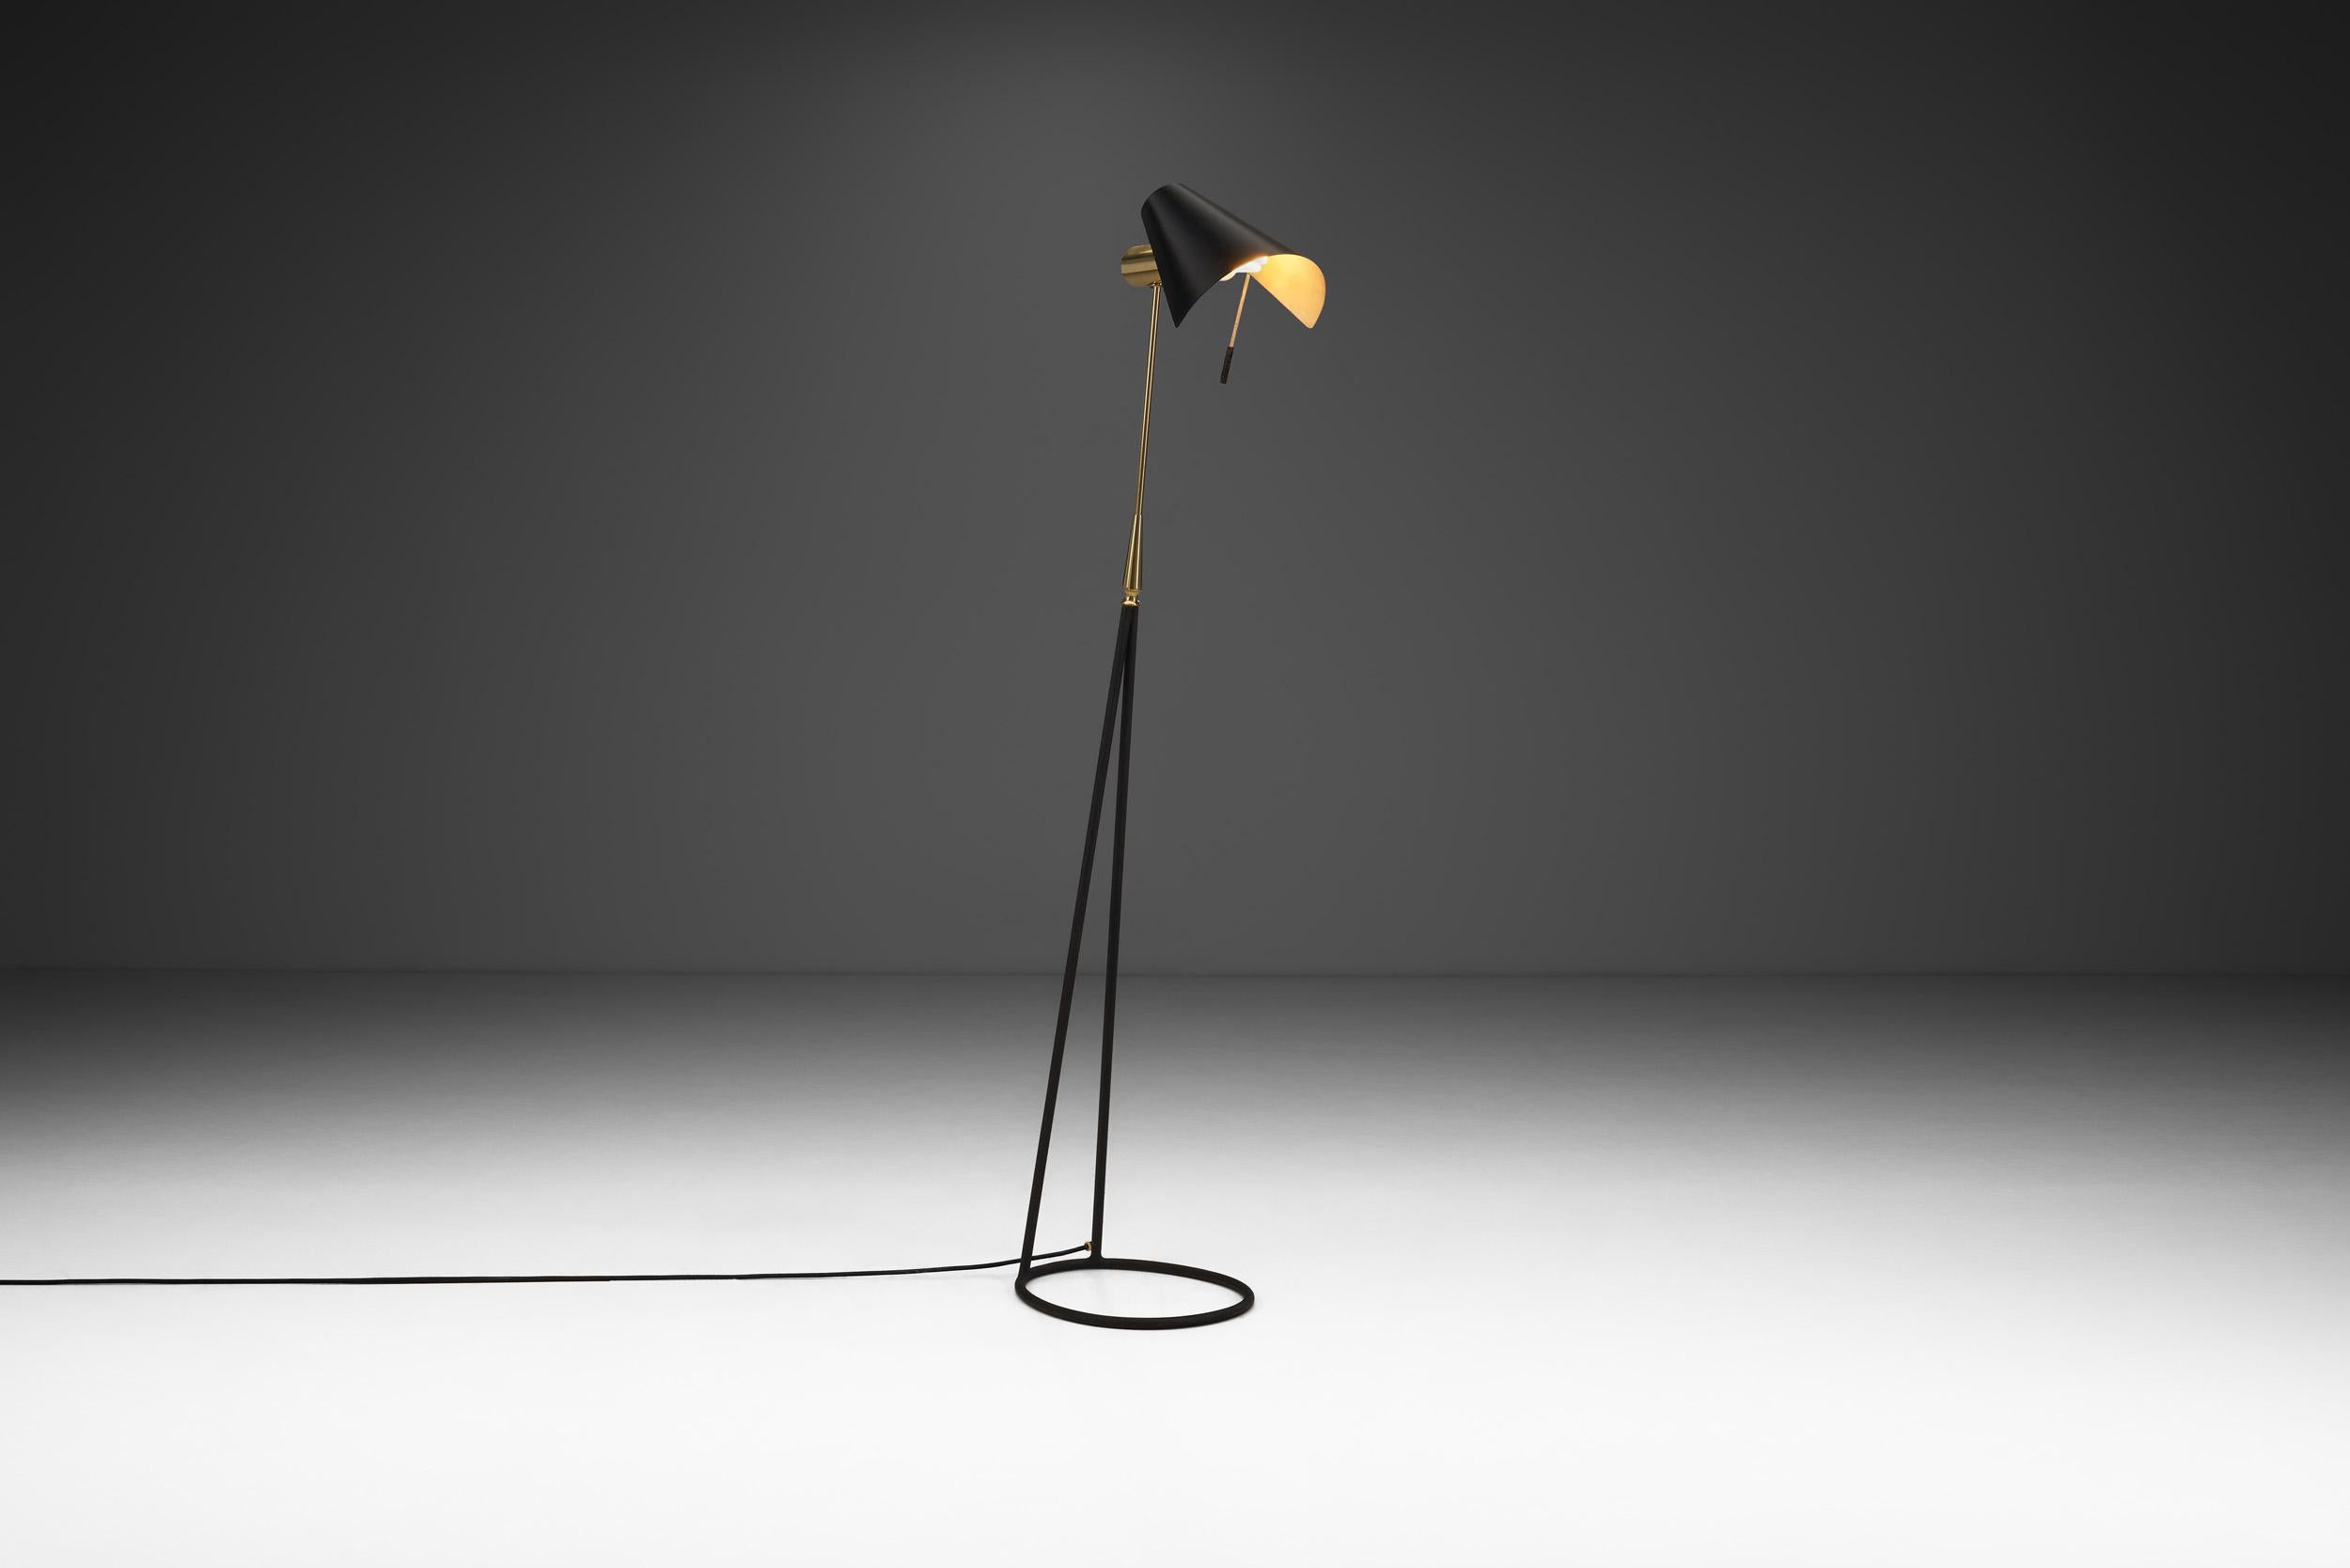 This rare floor lamp model possesses one of the most recognizable and unique designs in the prestigious repertoire of Falkenbergs Belysning’s 20th century lighting models’ catalogue. Its signature appearance is based on the circular base and the